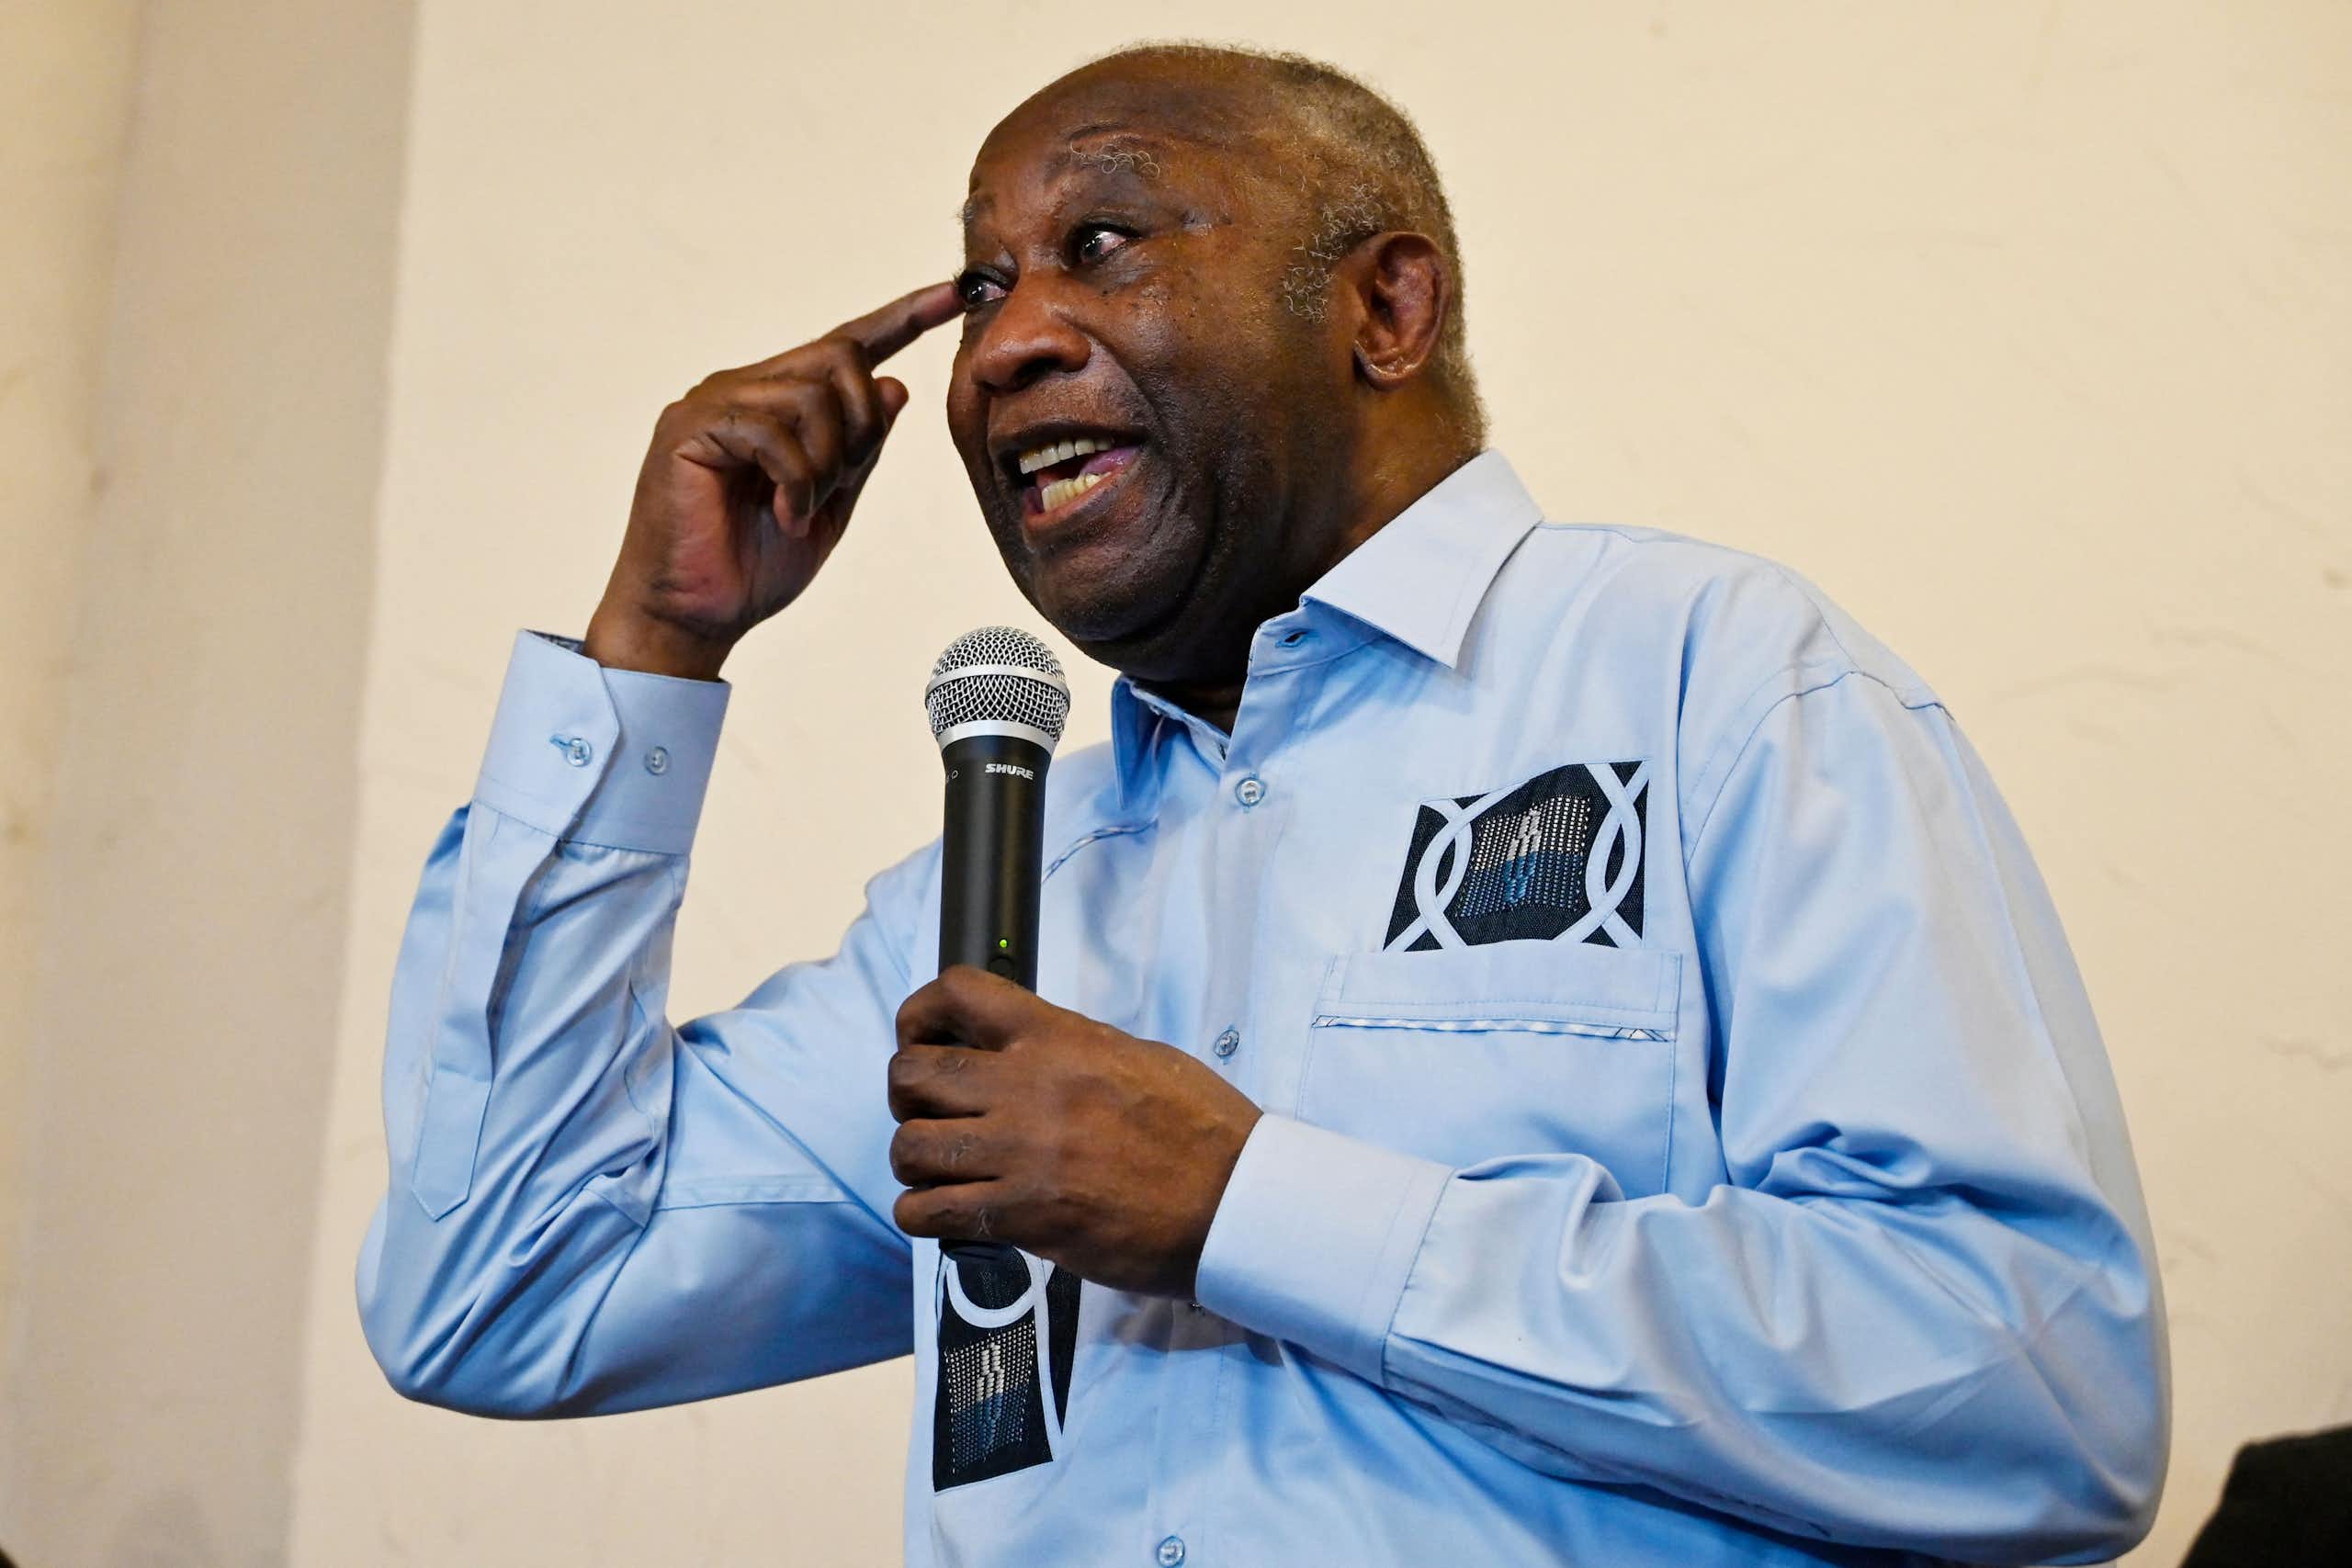 A man holding a microphone and gesticulating while speaking